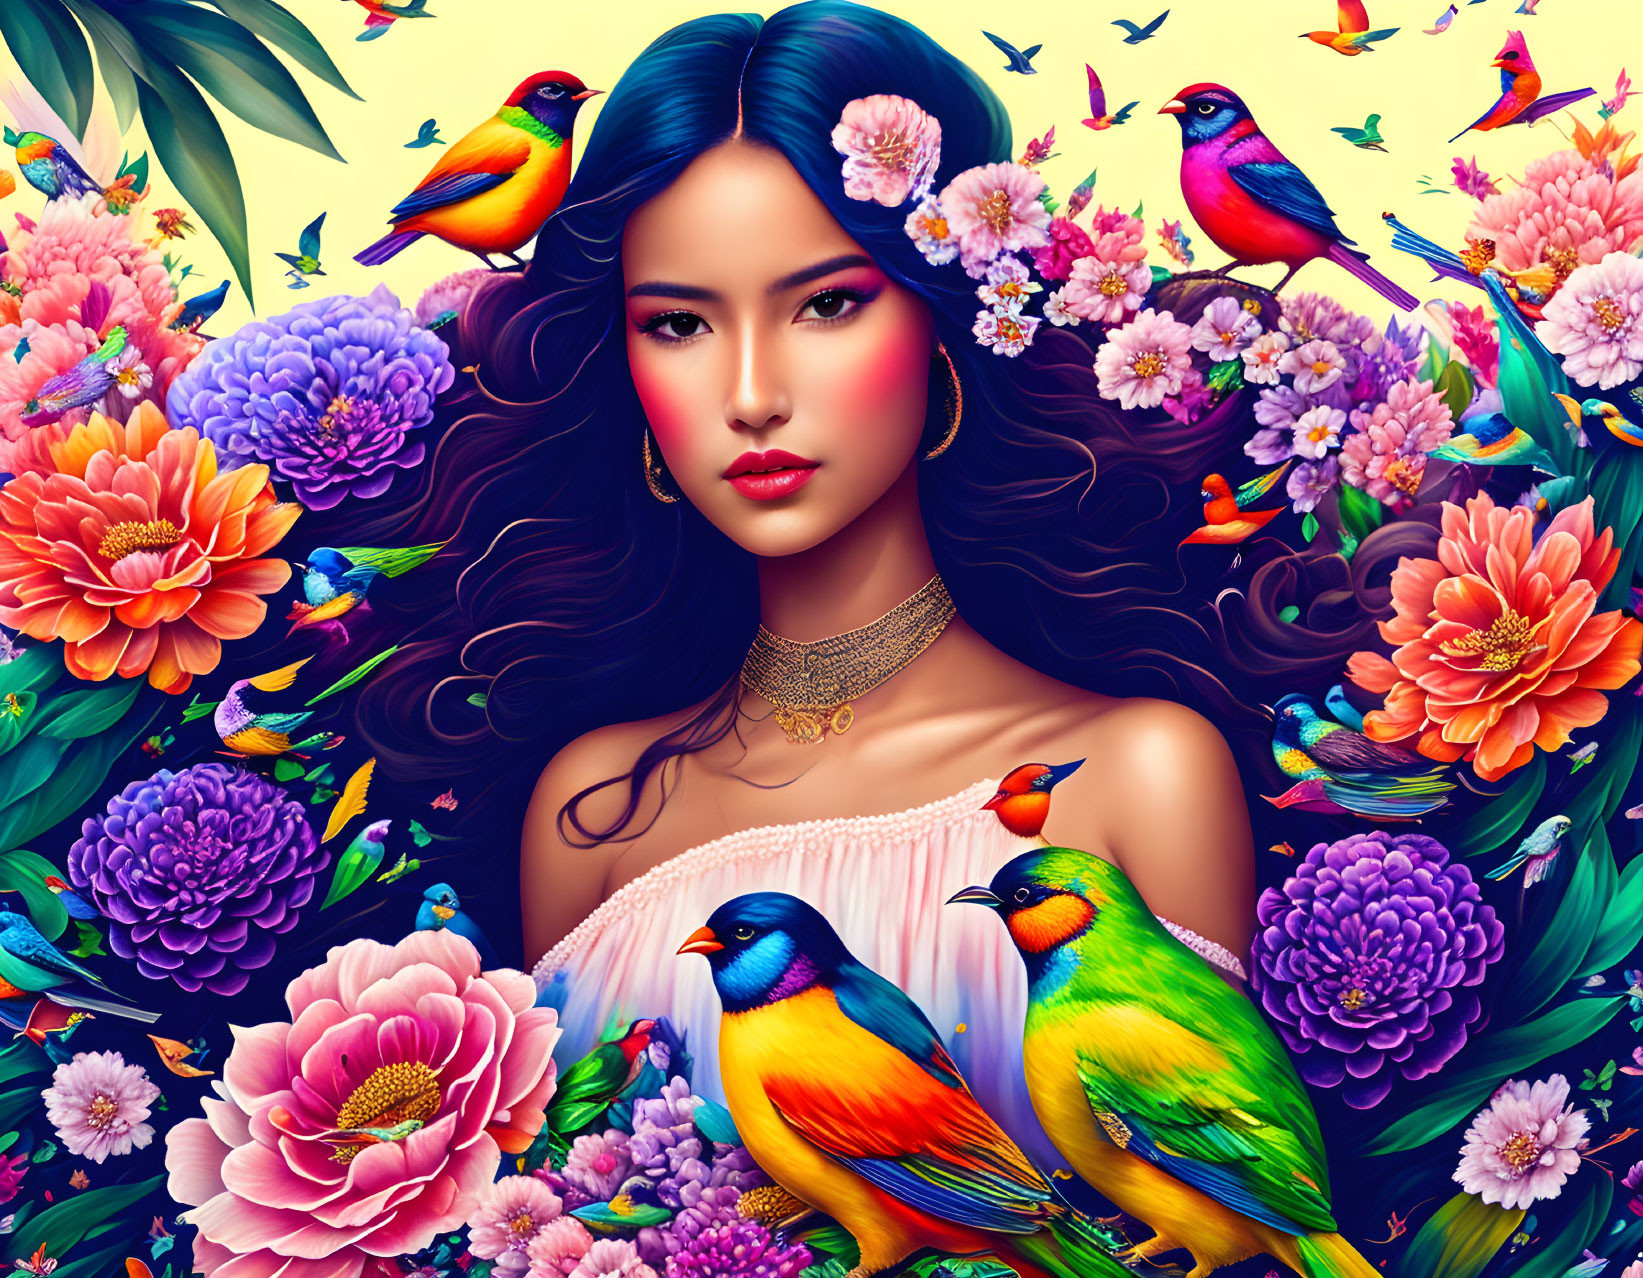 Colorful illustration of woman with dark hair and flowers, birds, and blooms on purple background